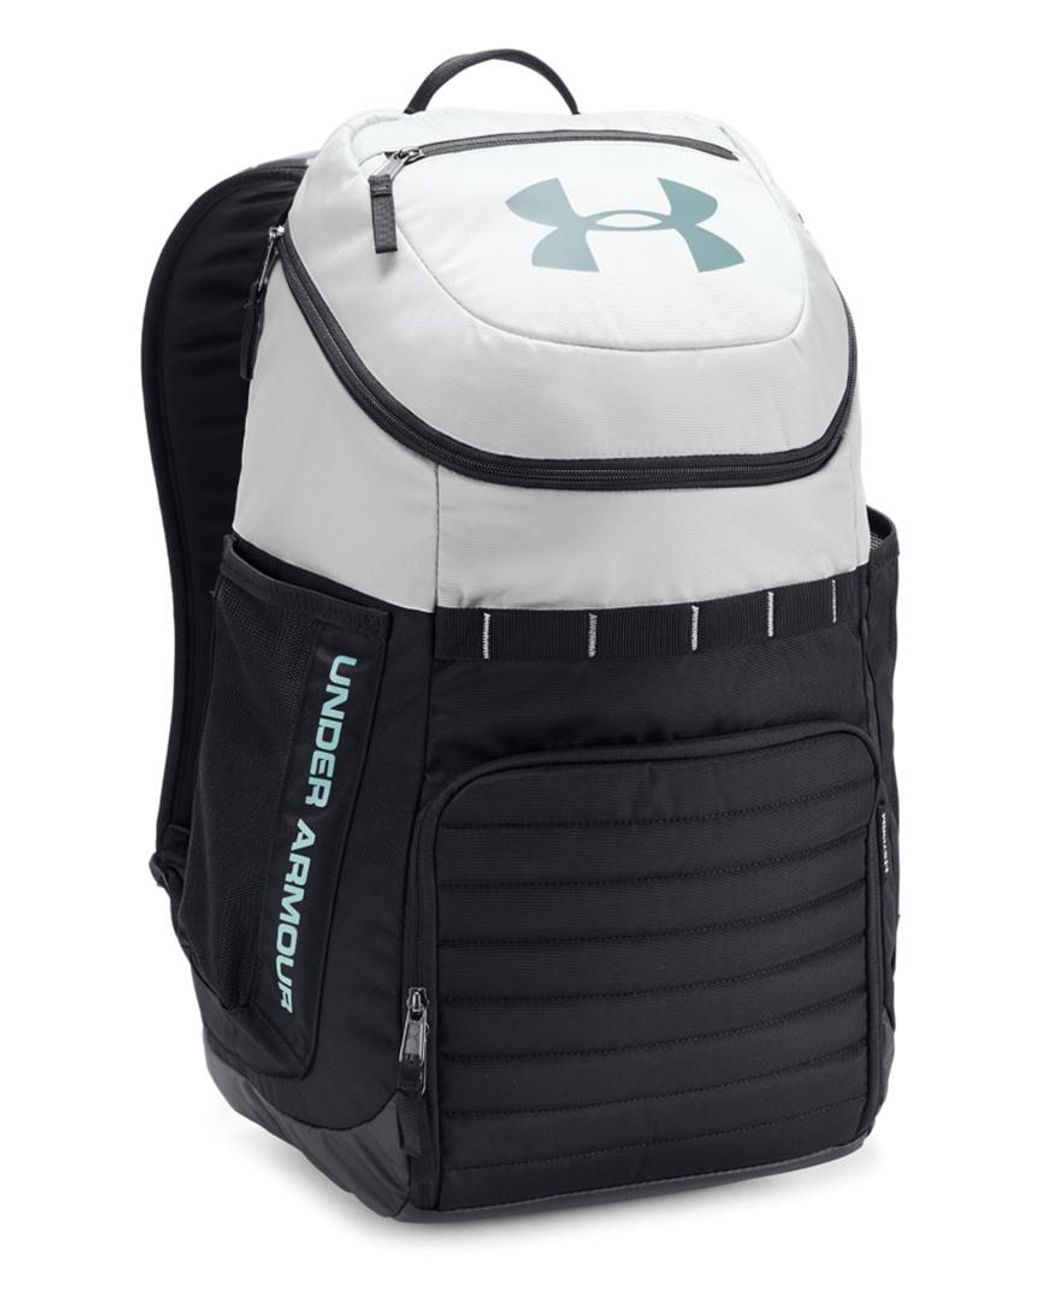 Under Armour Hustle 4.0 Backpack - Macy's